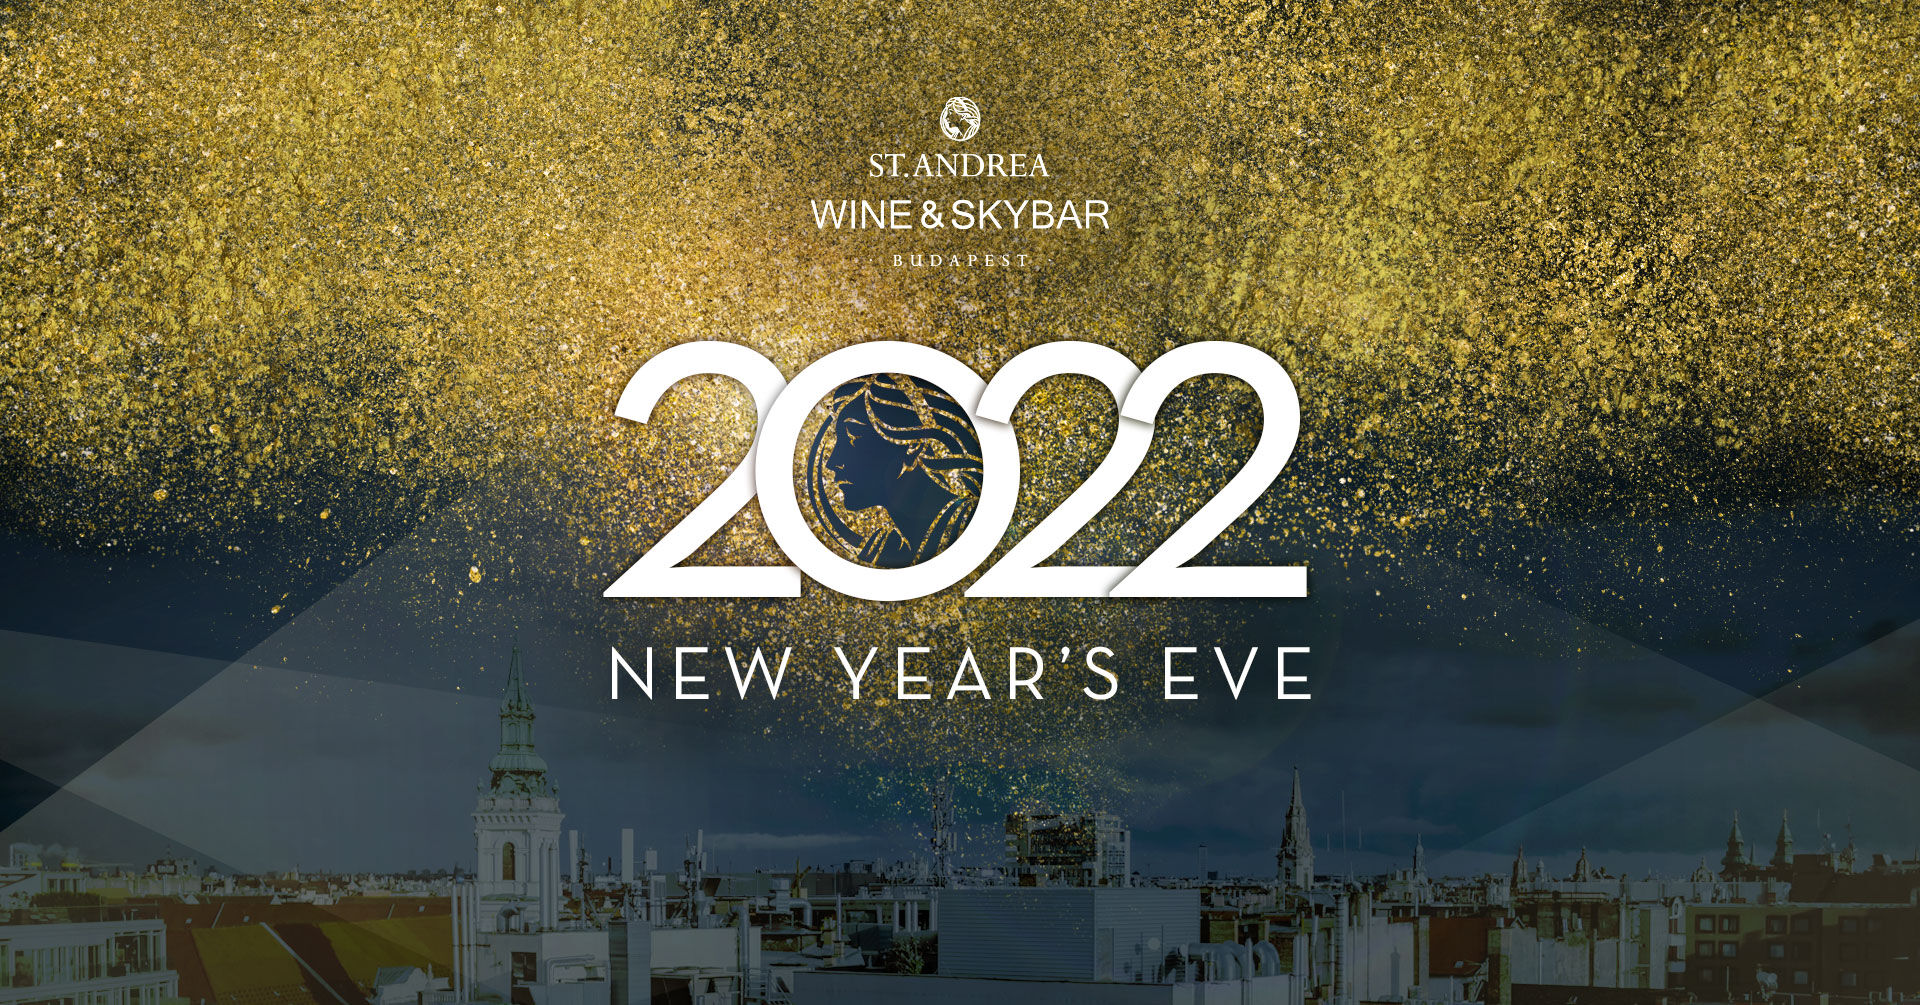 New Year's Eve / St. Andrea Wine&Skybar